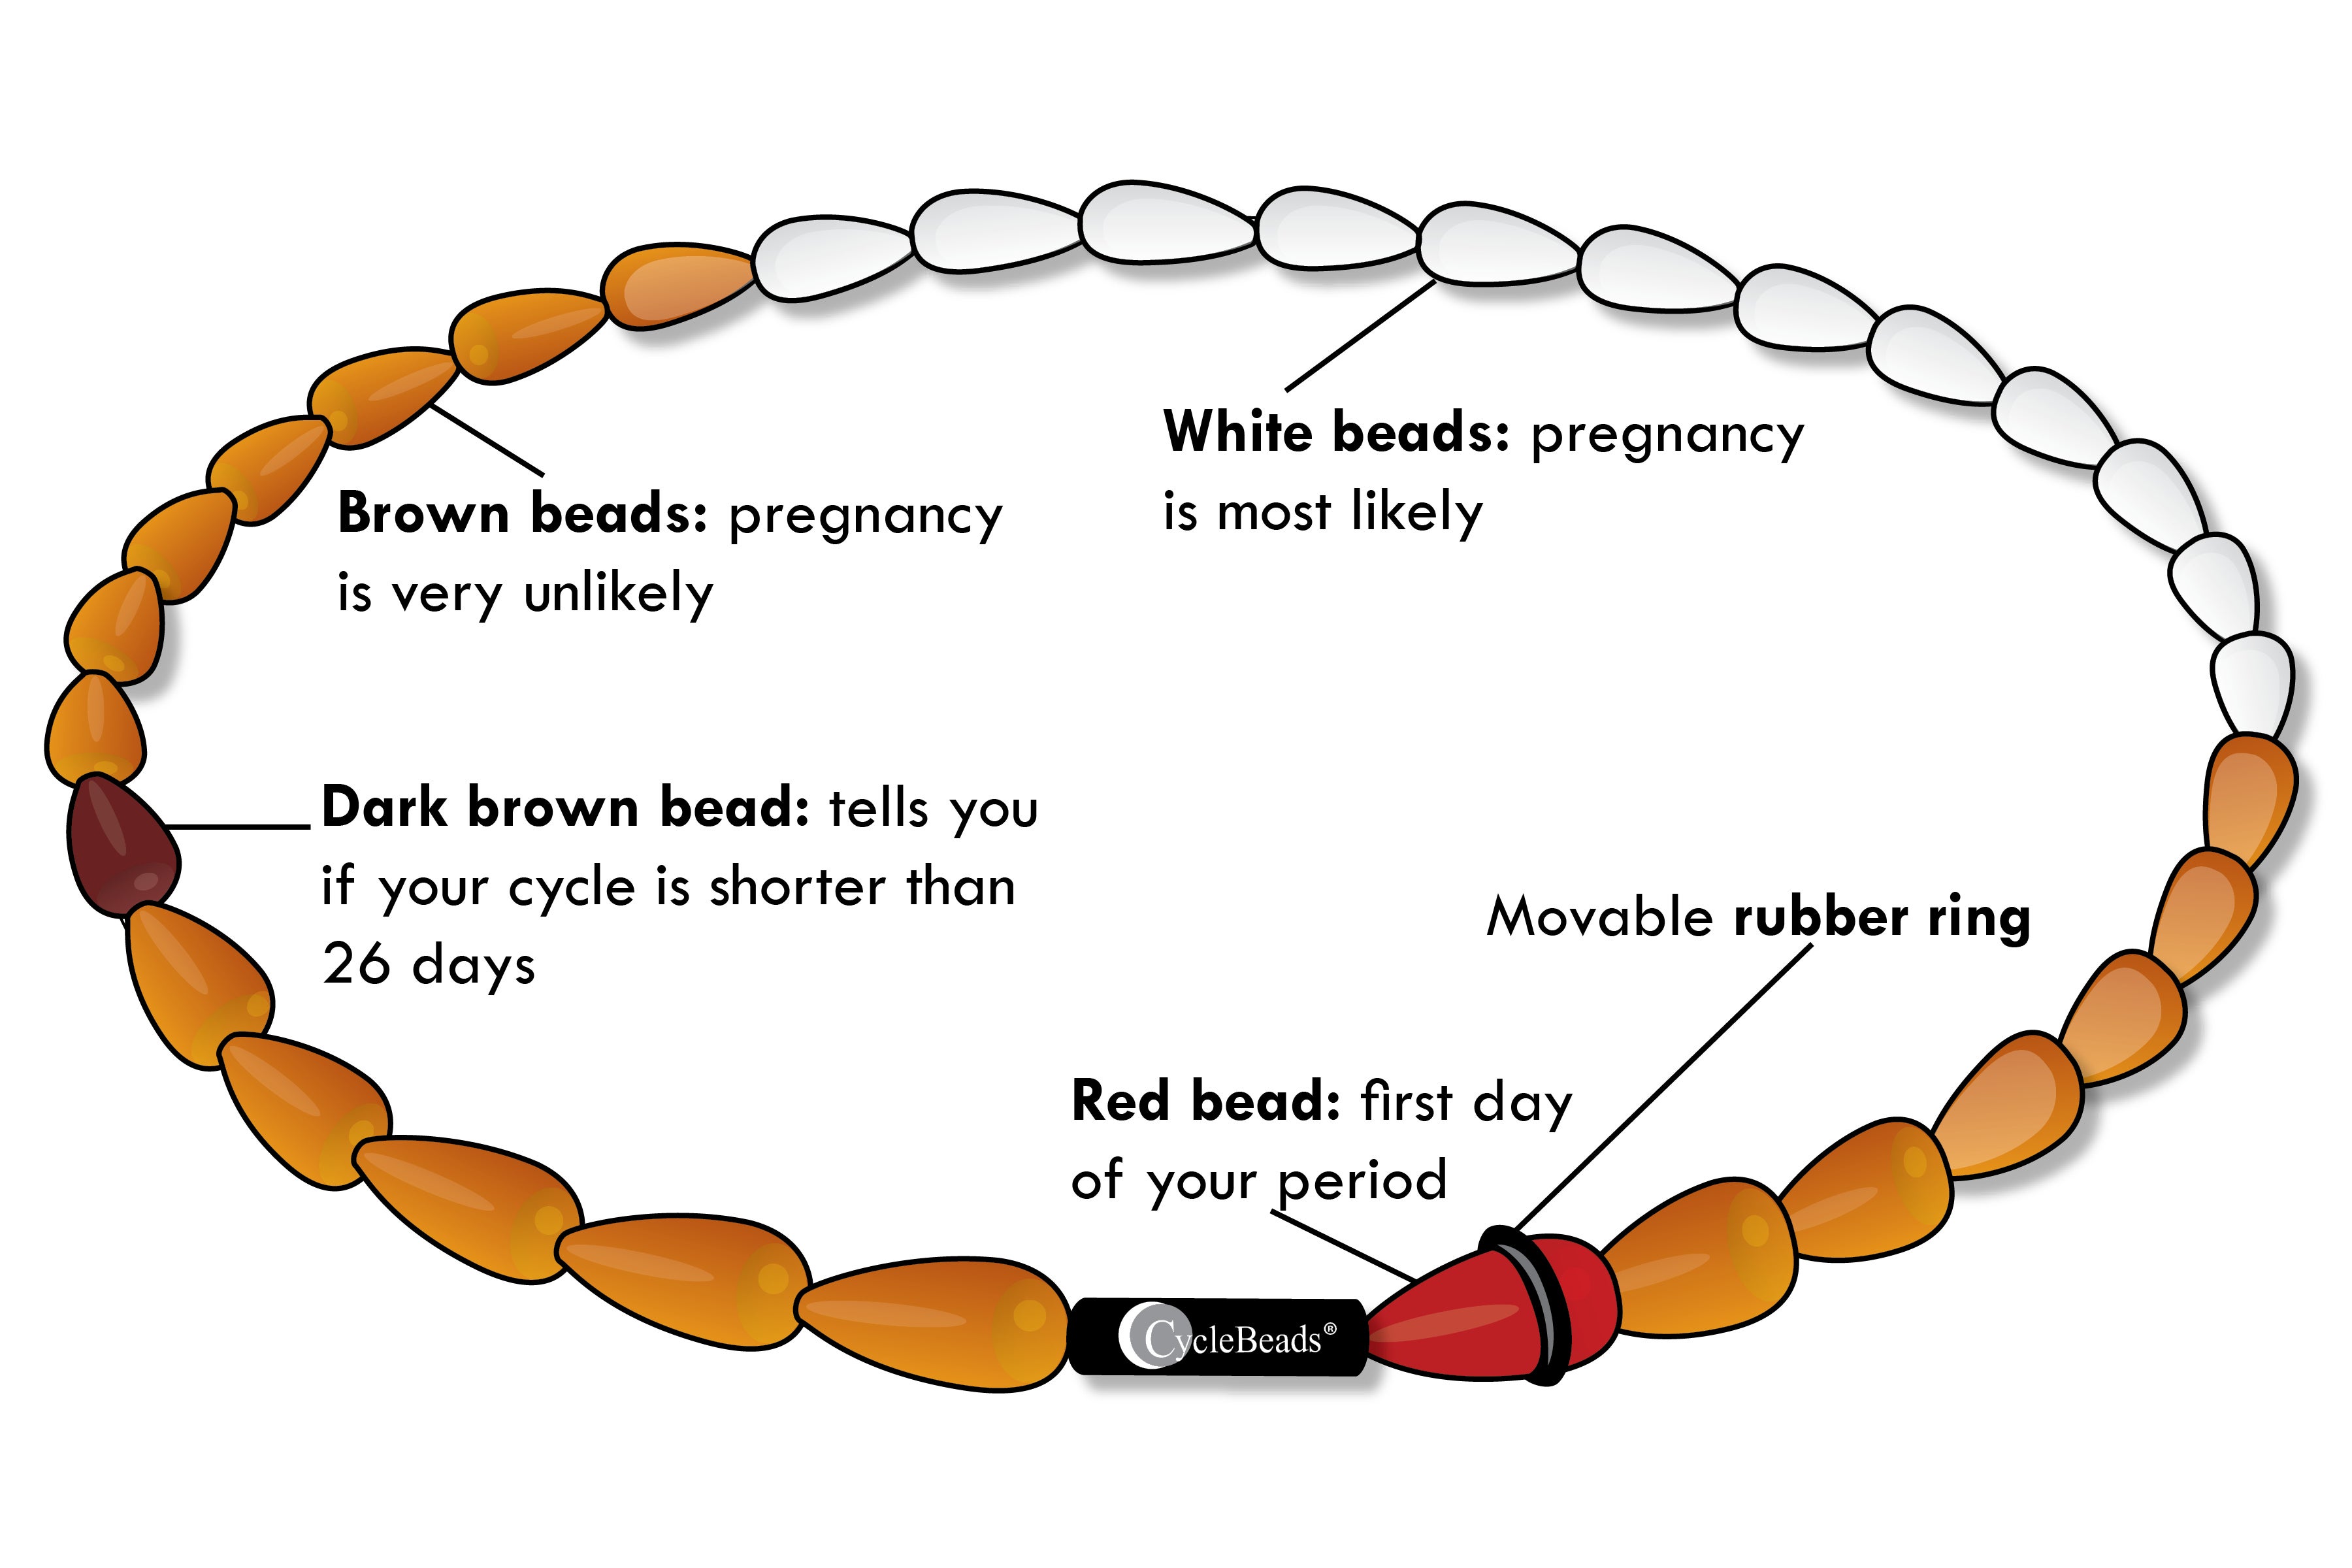 What are CycleBeads?  Natural Family Planning and Birth Control 